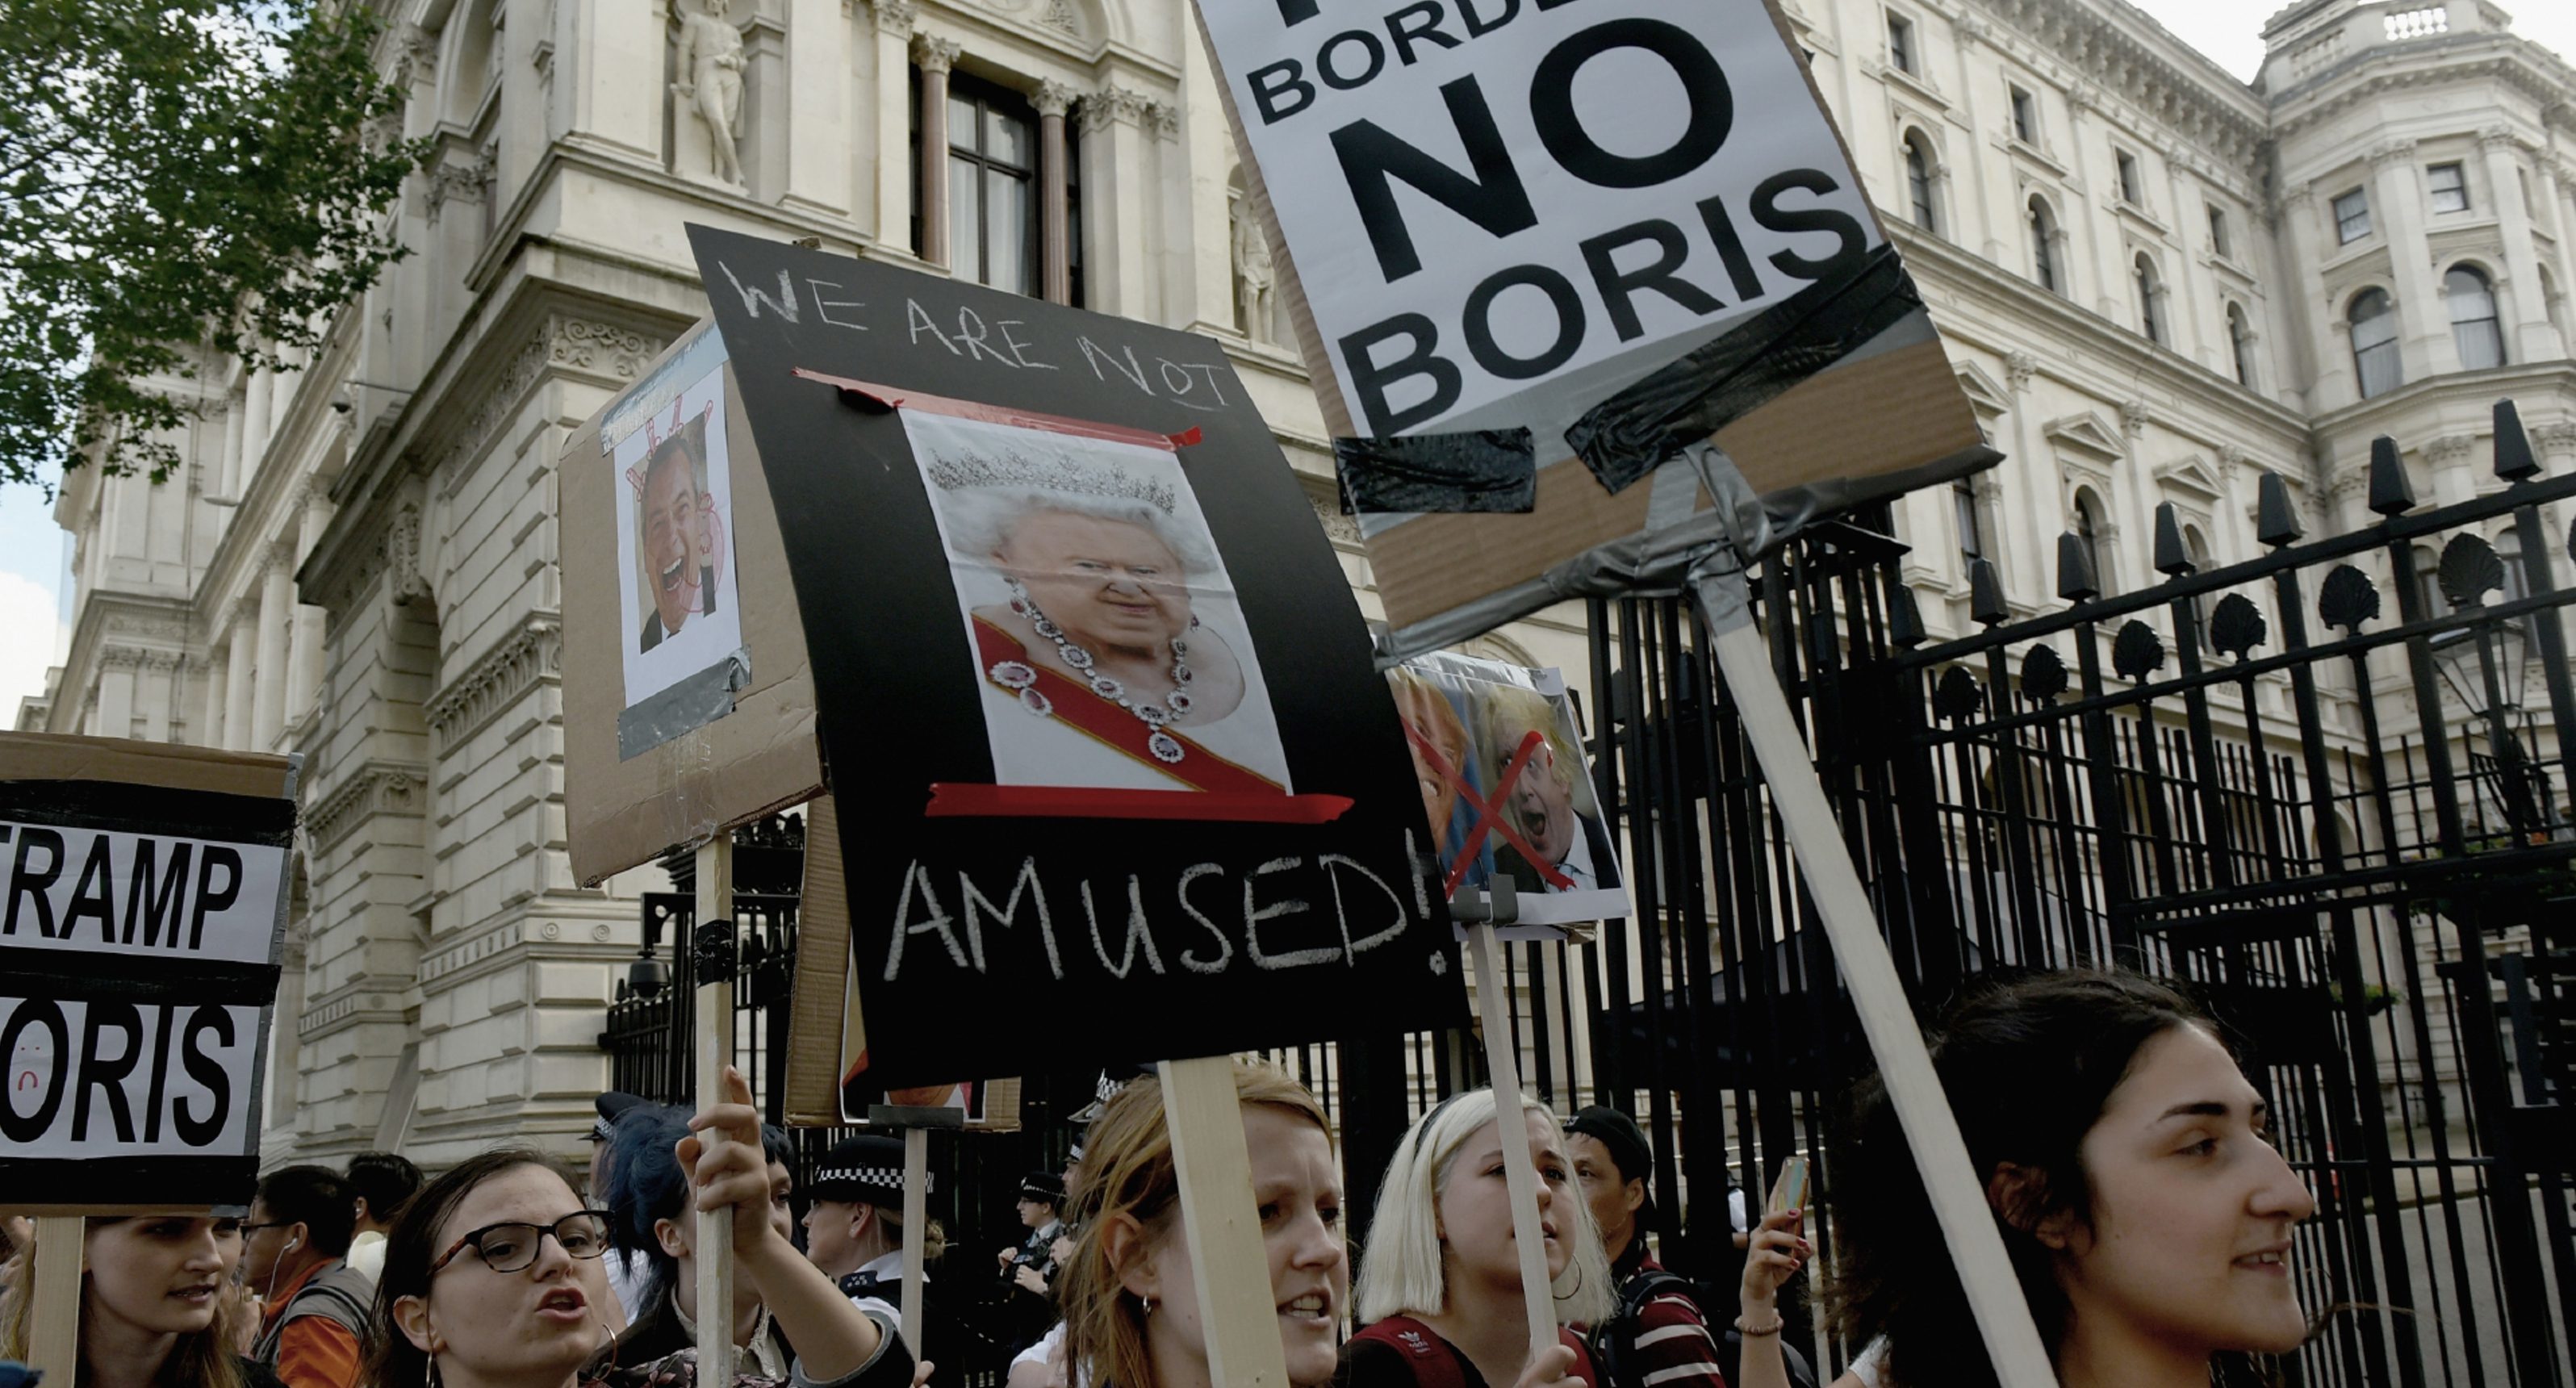 Young protesters demonstrate outside Downing Street.